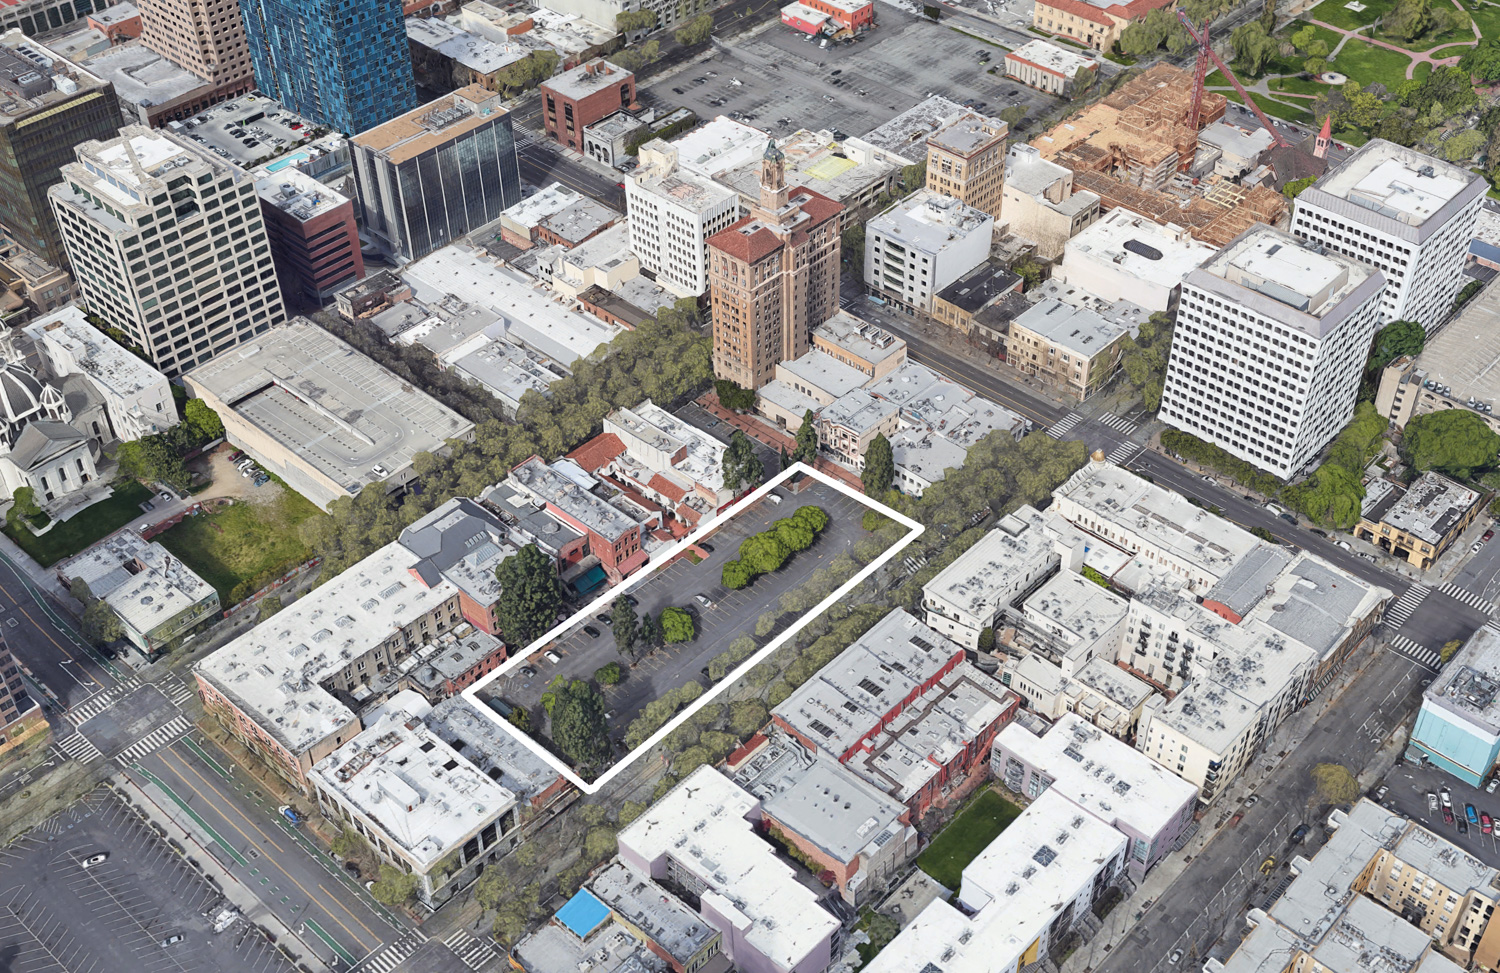 35 South 2nd Street outlined, image courtesy Google Satellite